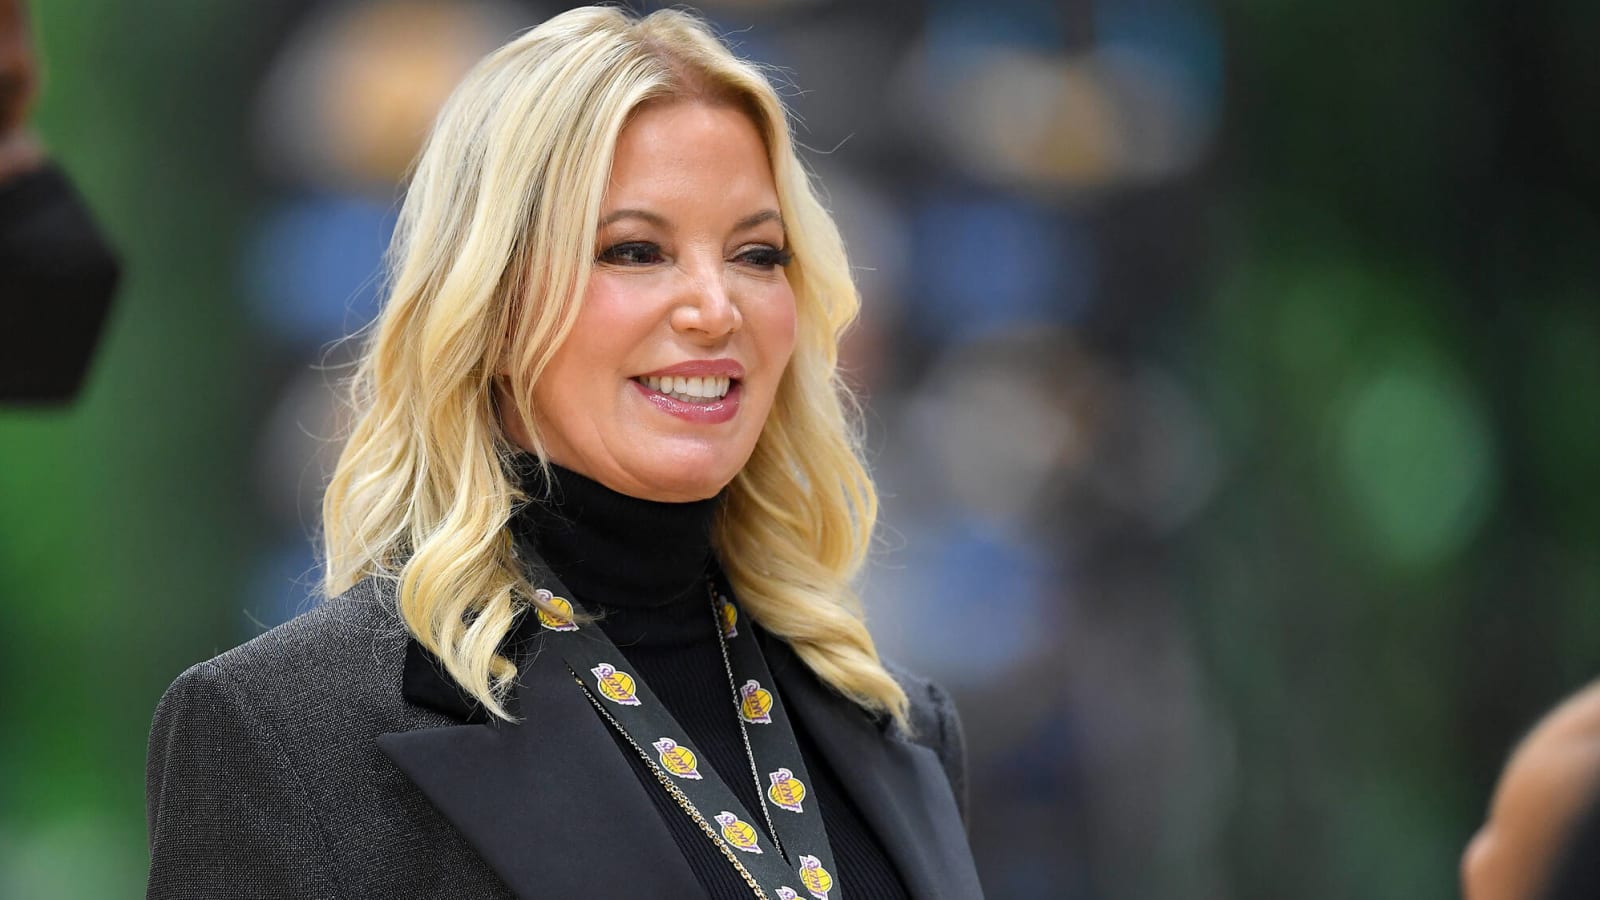 How will Lakers fans respond to Jeanie Buss during upcoming ceremony?